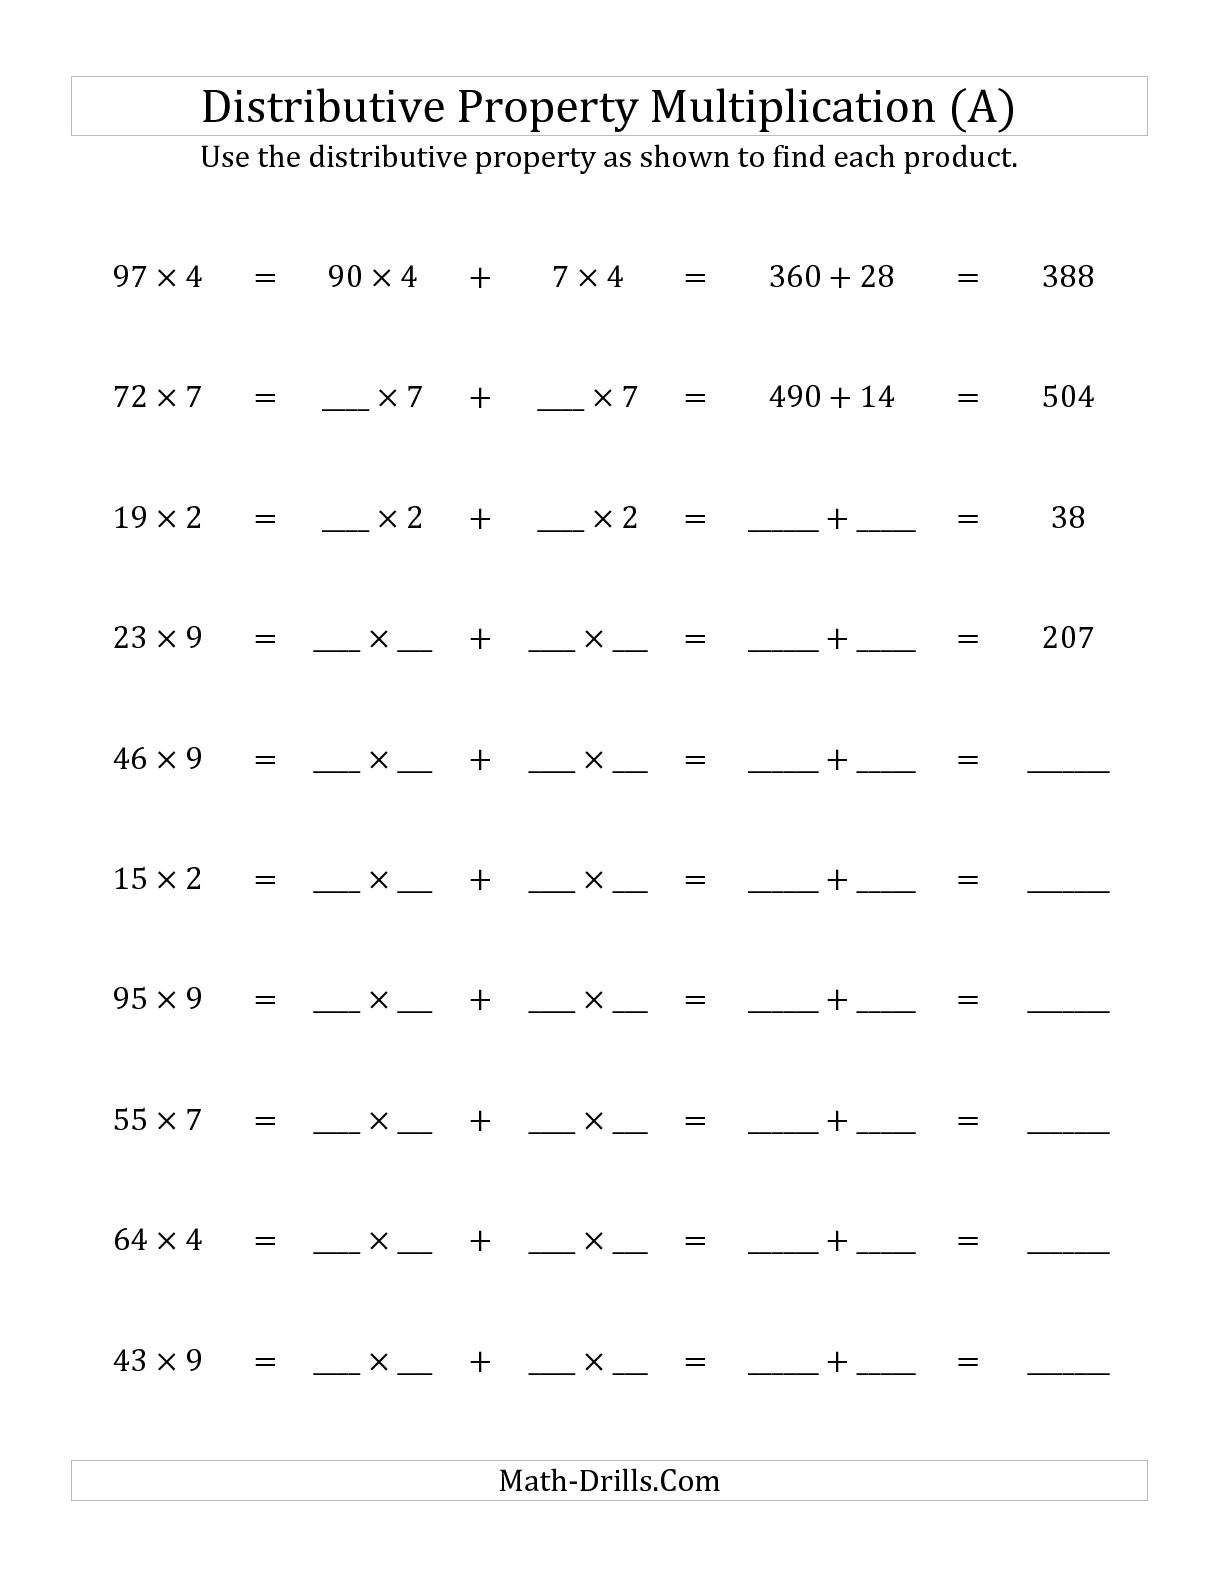 10-best-images-of-distributive-property-worksheets-for-elementary-distributive-property